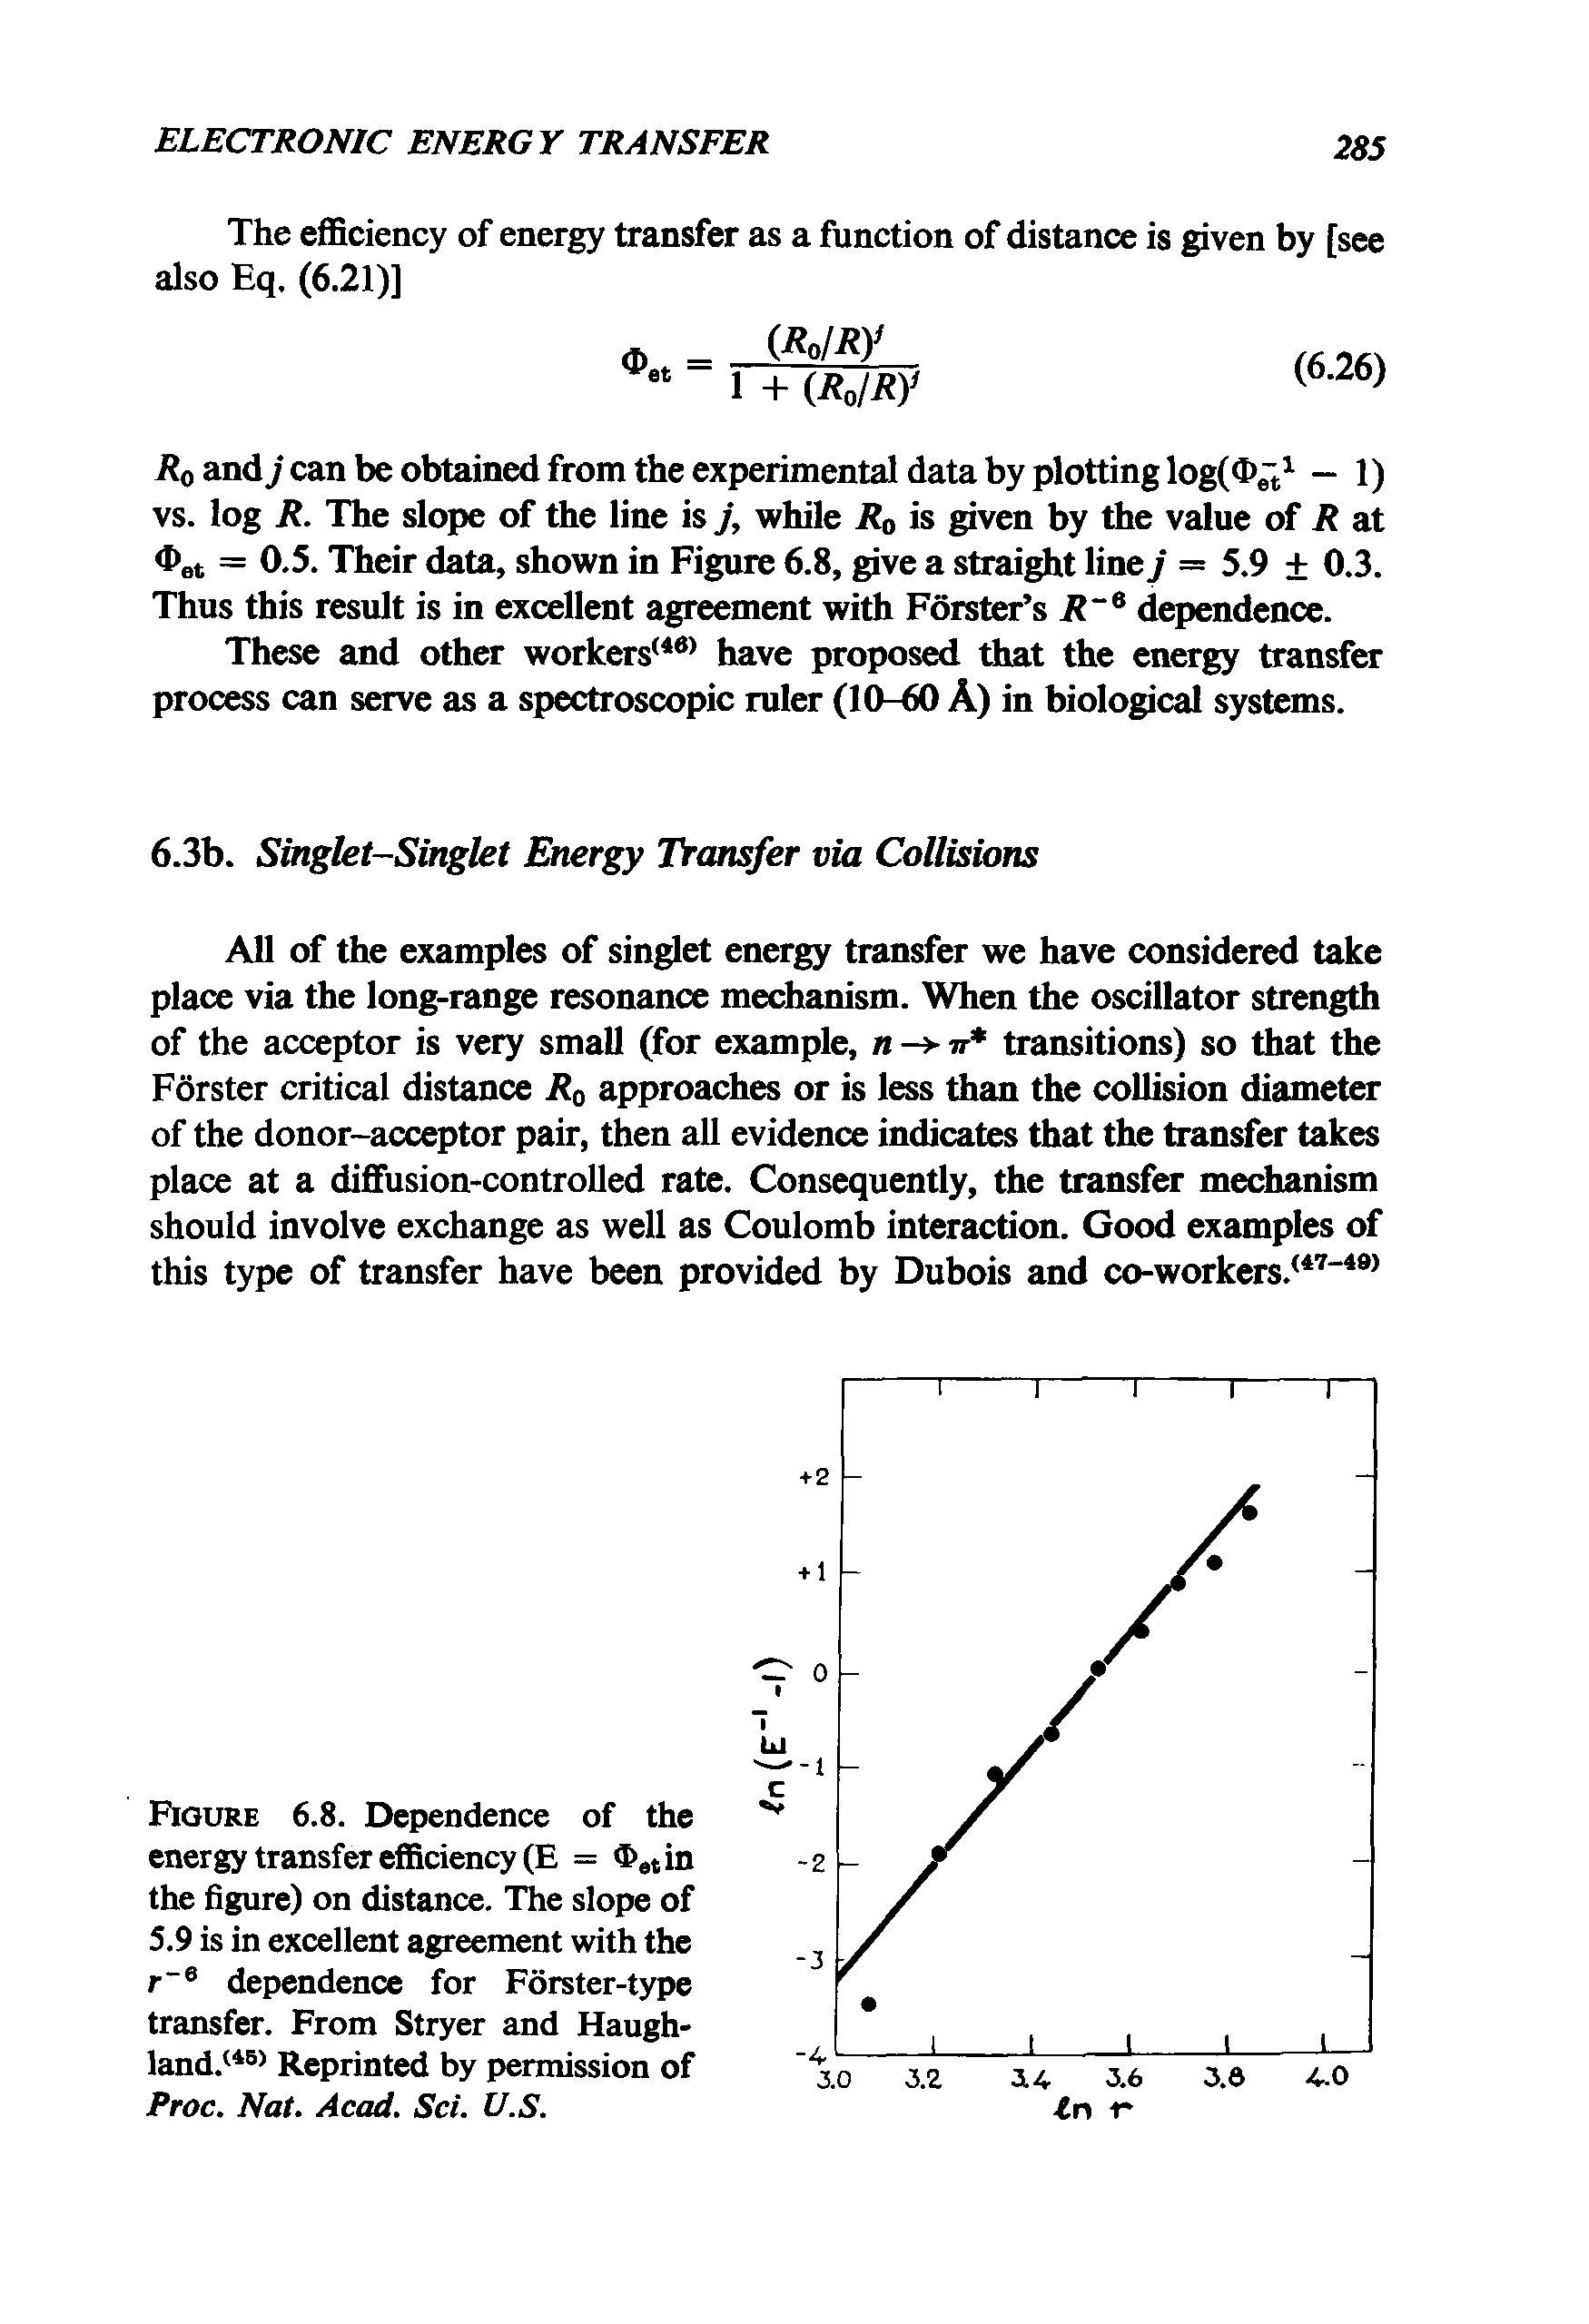 Figure 6.8. Dependence of the energy transfer efficiency (E = <t>etin the figure) on distance. The slope of 5.9 is in excellent agreement with the r e dependence for Forster-type transfer. From Stryer and Haugh-land.(45) Reprinted by permission of Proc. Nat. Acad. Sci. U.S.